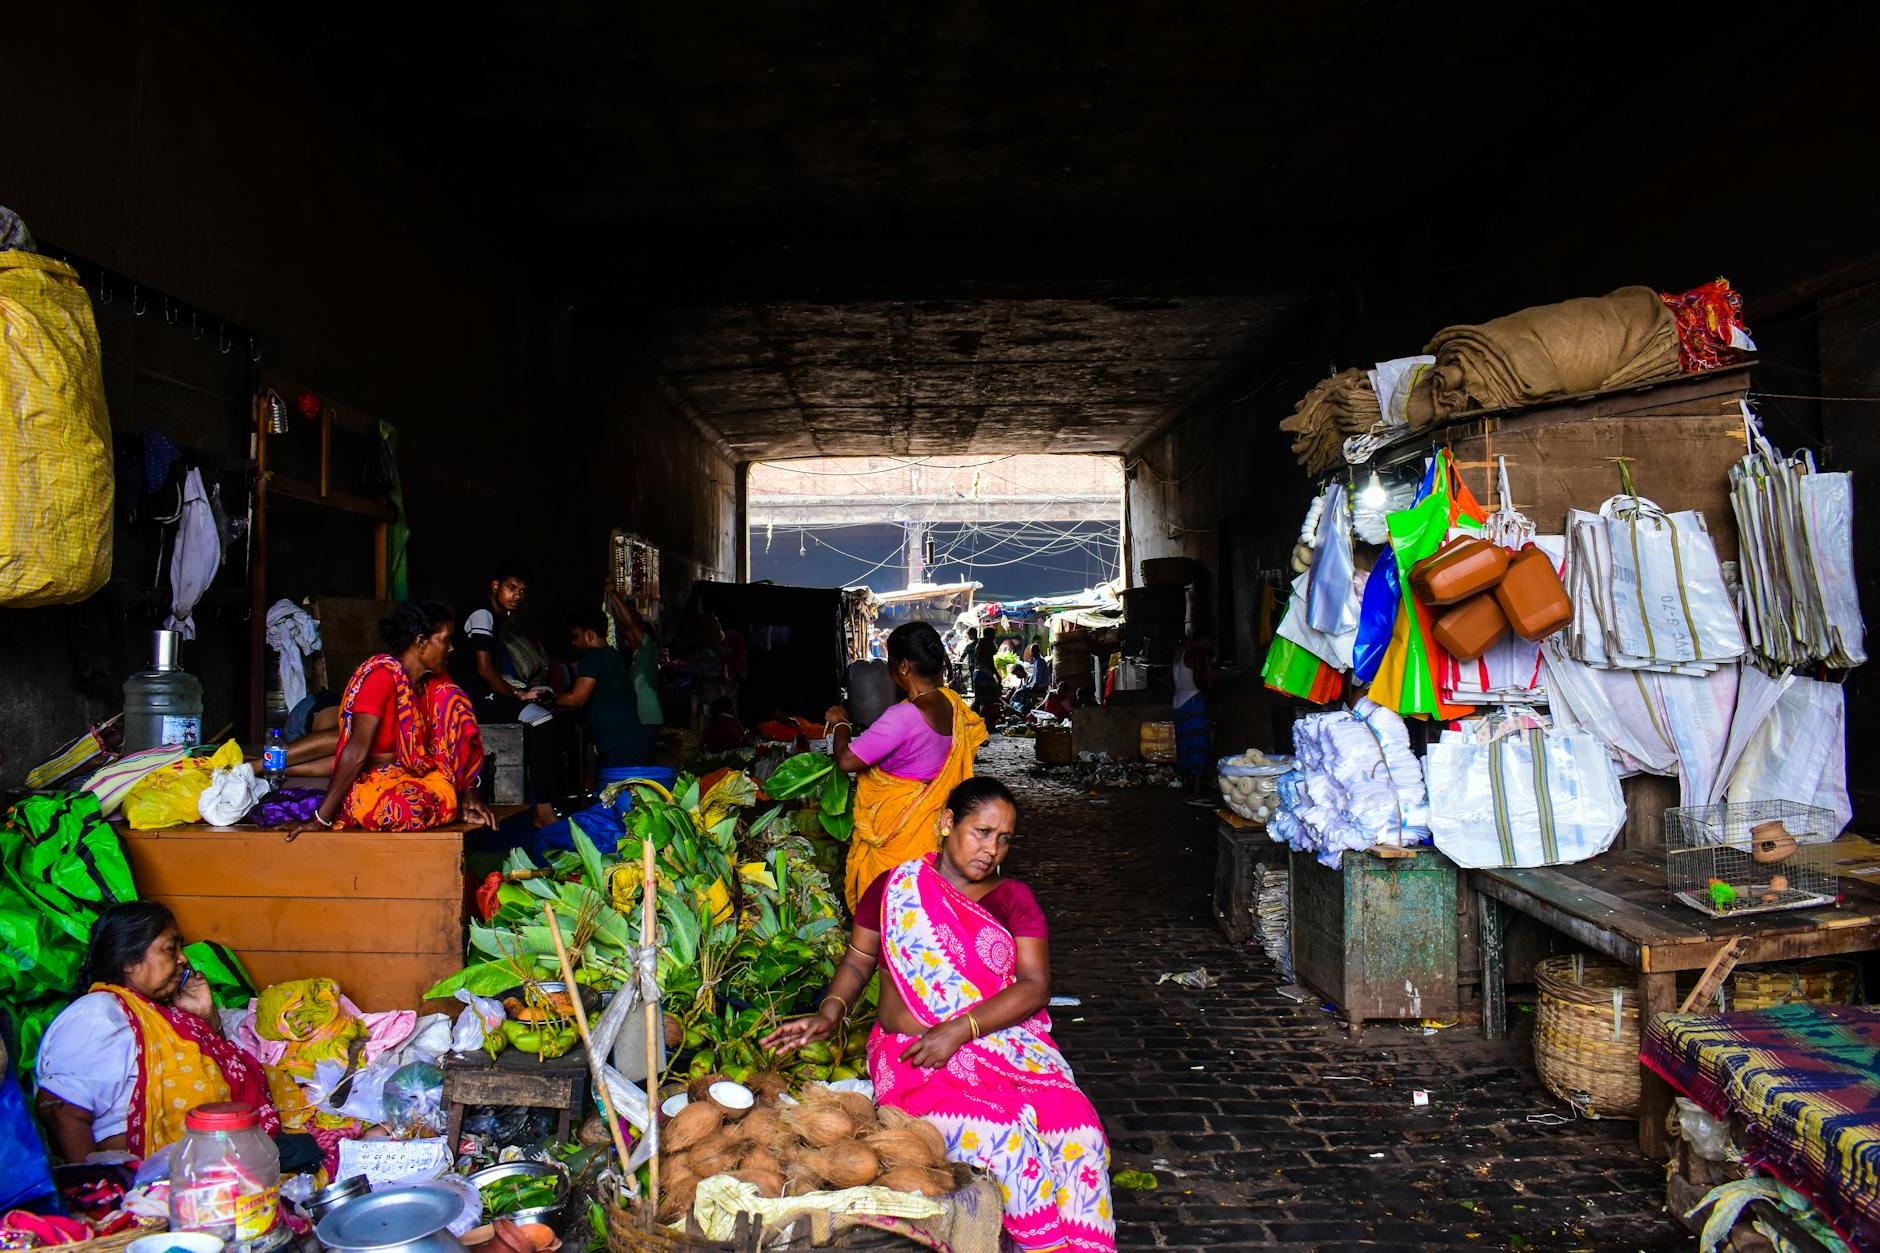 A woman sitting in a market